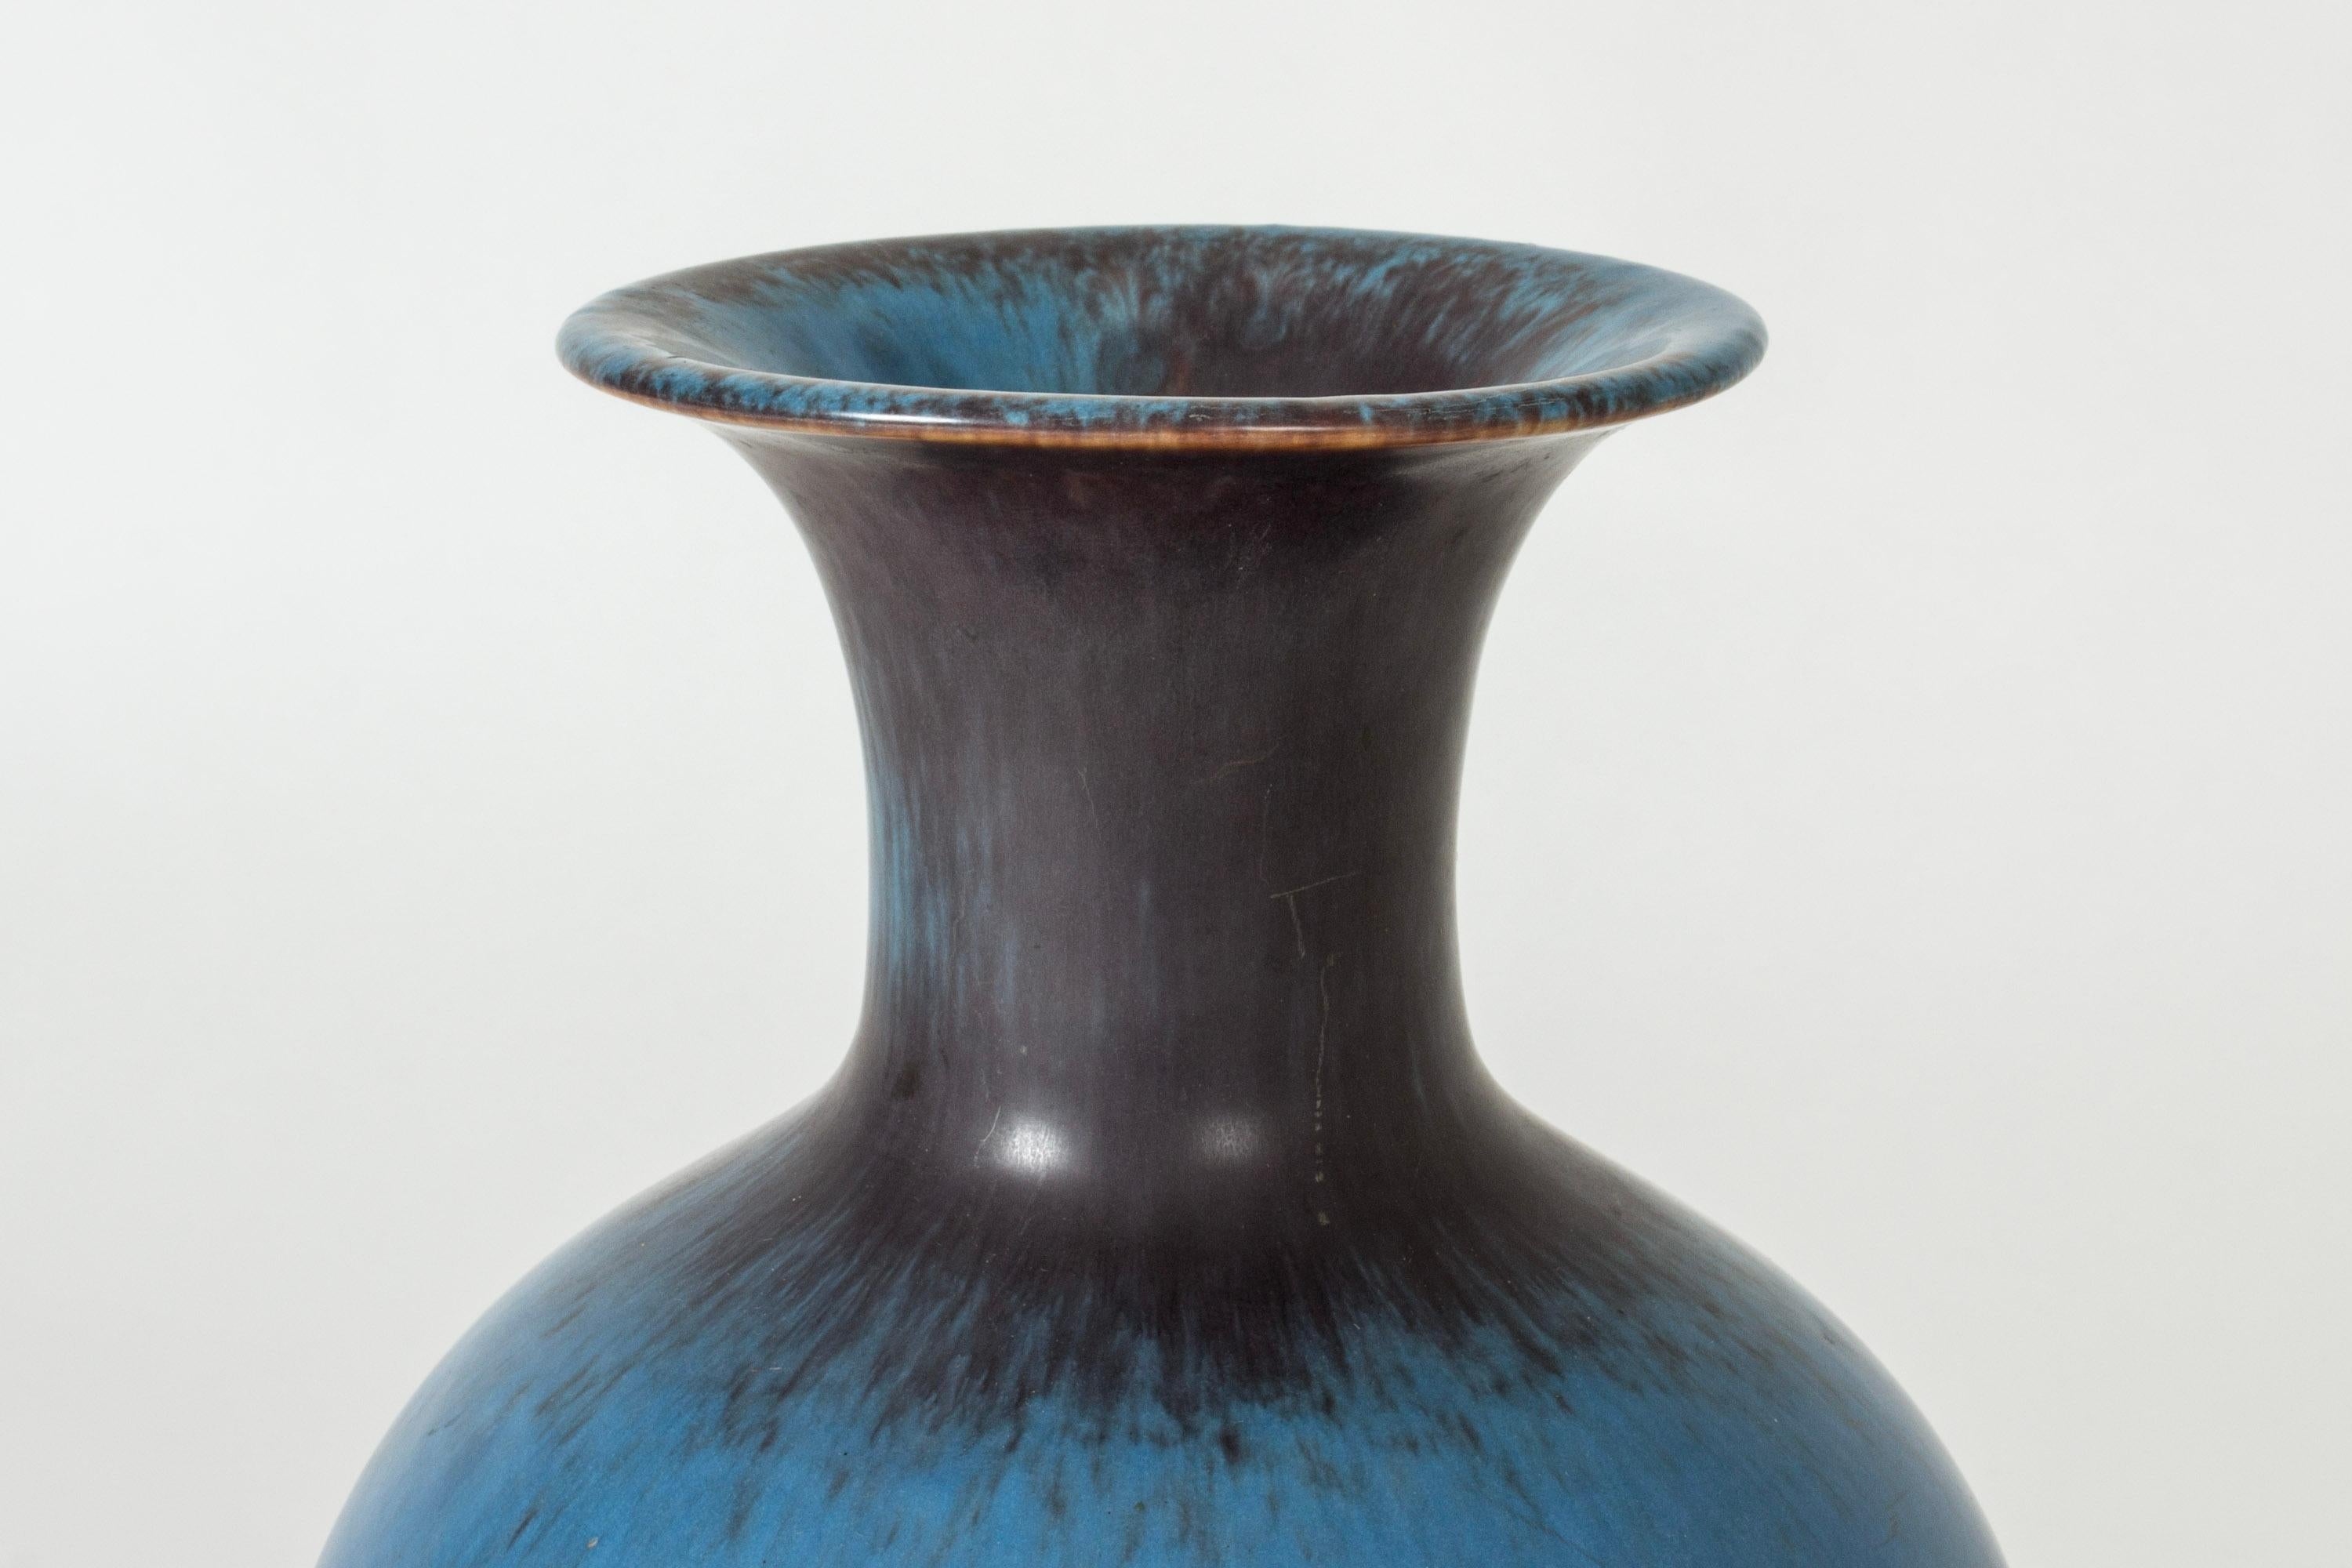 Large stoneware floor vase by Gunnar Nylund in a classic shape. Beautiful glaze that alternates between purple and clear blue in dramatic splashes.